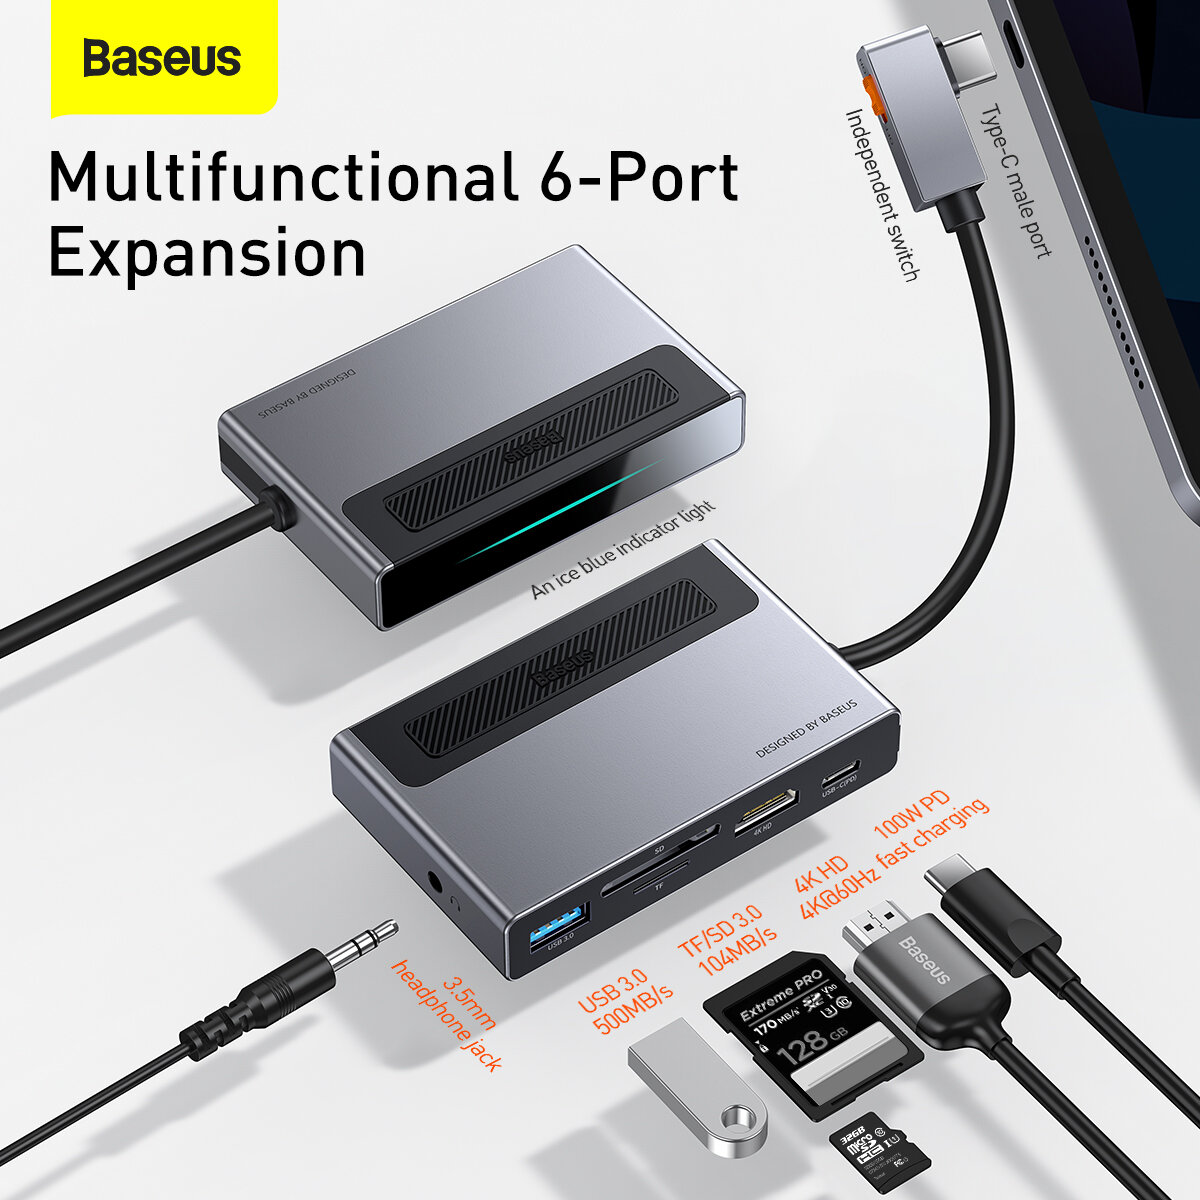 

Baseus Multifunctional USB3.0 Type-C HUB Supports 4K HDMI OTG PD Fast ChargingTF/ SD Card Dual Reading with a Retracta